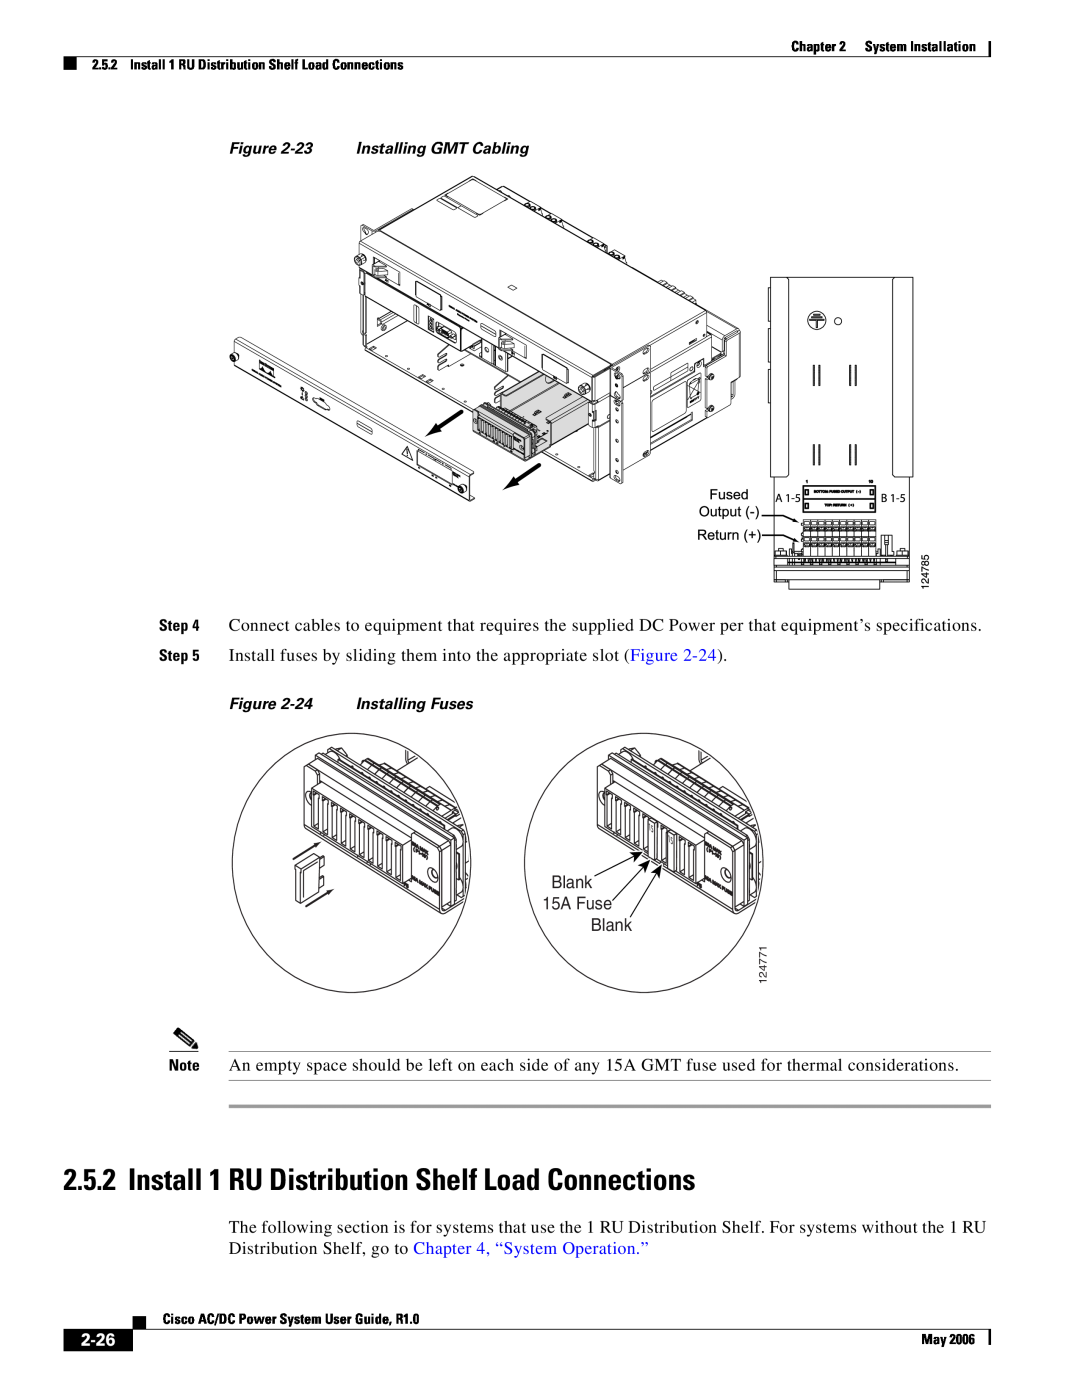 Cisco Systems 124792, 124778, 159330 manual Install 1 RU Distribution Shelf Load Connections, Blank 15A Fuse Blank, 2-26 